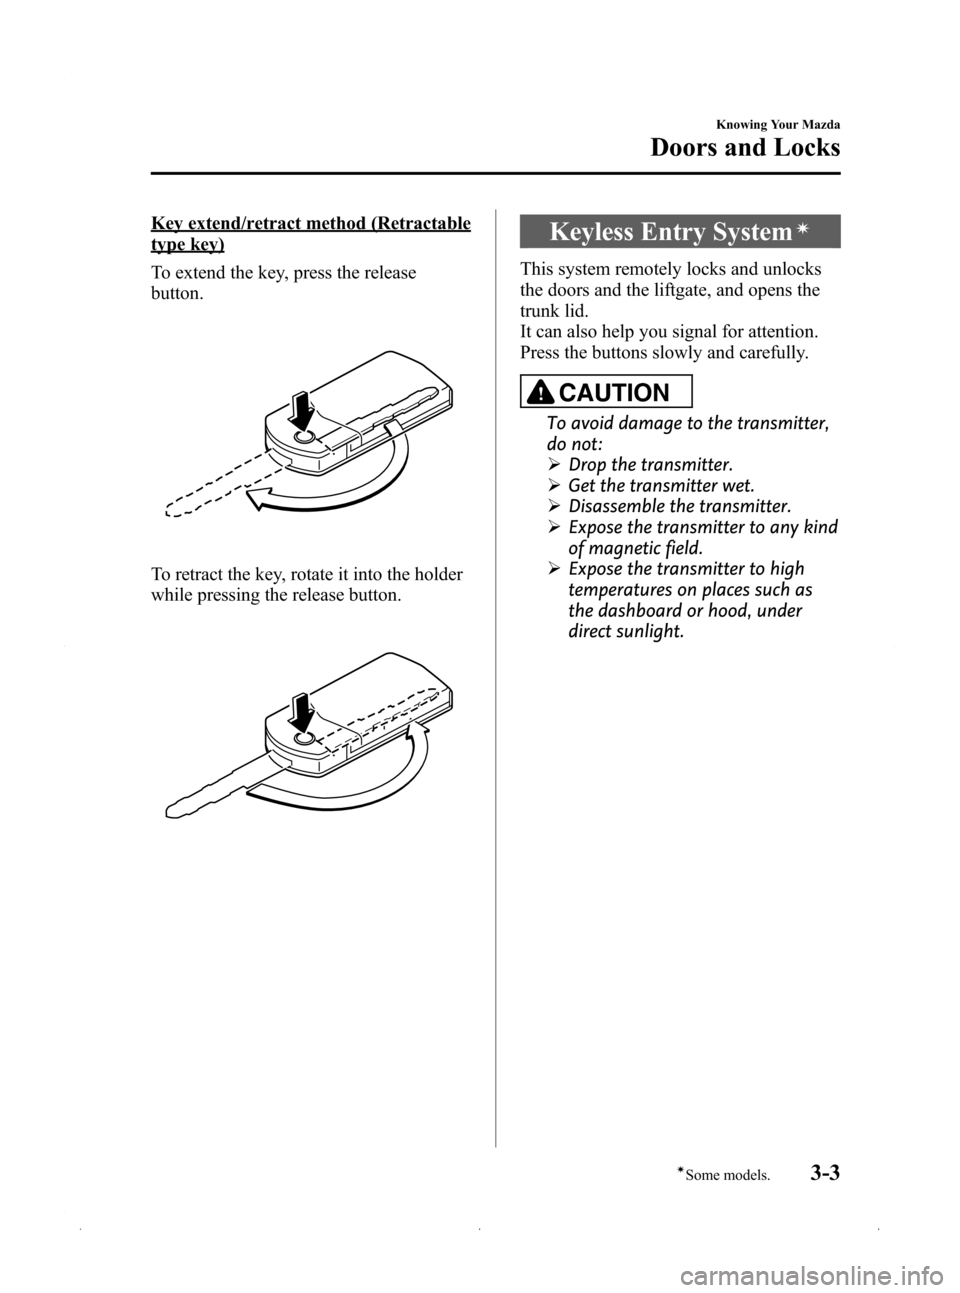 MAZDA MODEL 3 HATCHBACK 2009  Owners Manual (in English) Black plate (77,1)
Key extend/retract method (Retractable
type key)
To extend the key, press the release
button.
To retract the key, rotate it into the holder
while pressing the release button.
Keyles